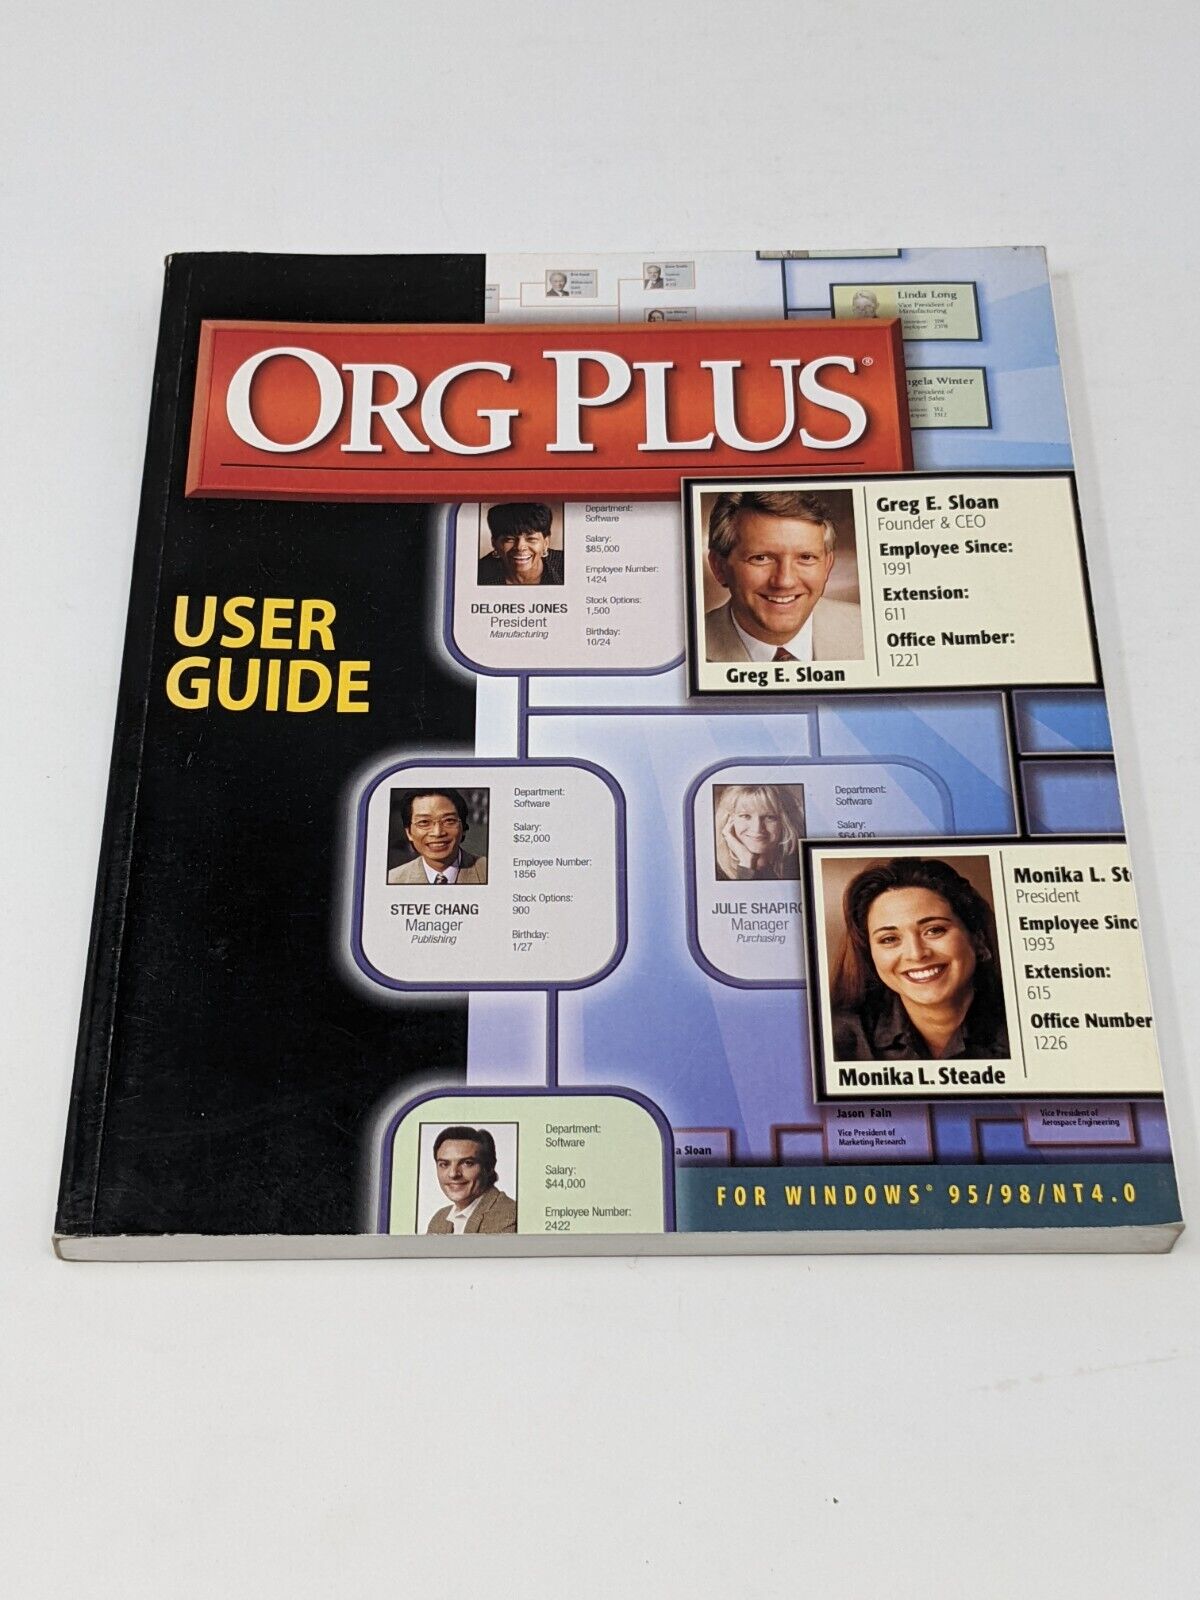 Org Plus Users Guide For Windows 95/98/NT4.0